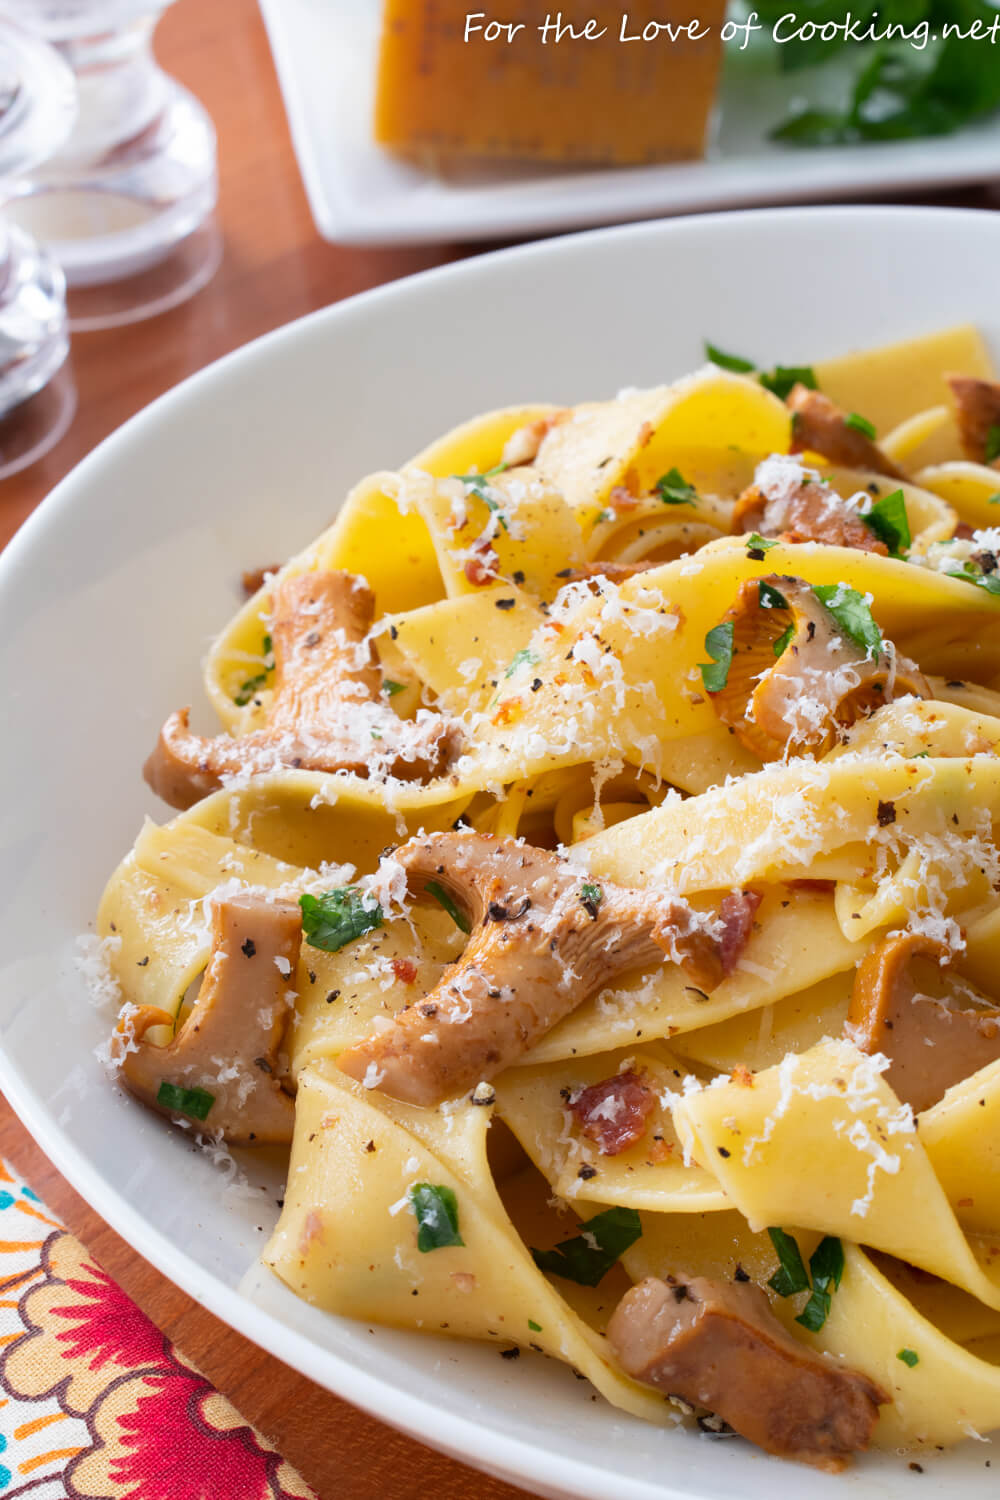 Pappardelle With Chanterelles In A Garlic Butter Wine Sauce For The Love Of Cooking